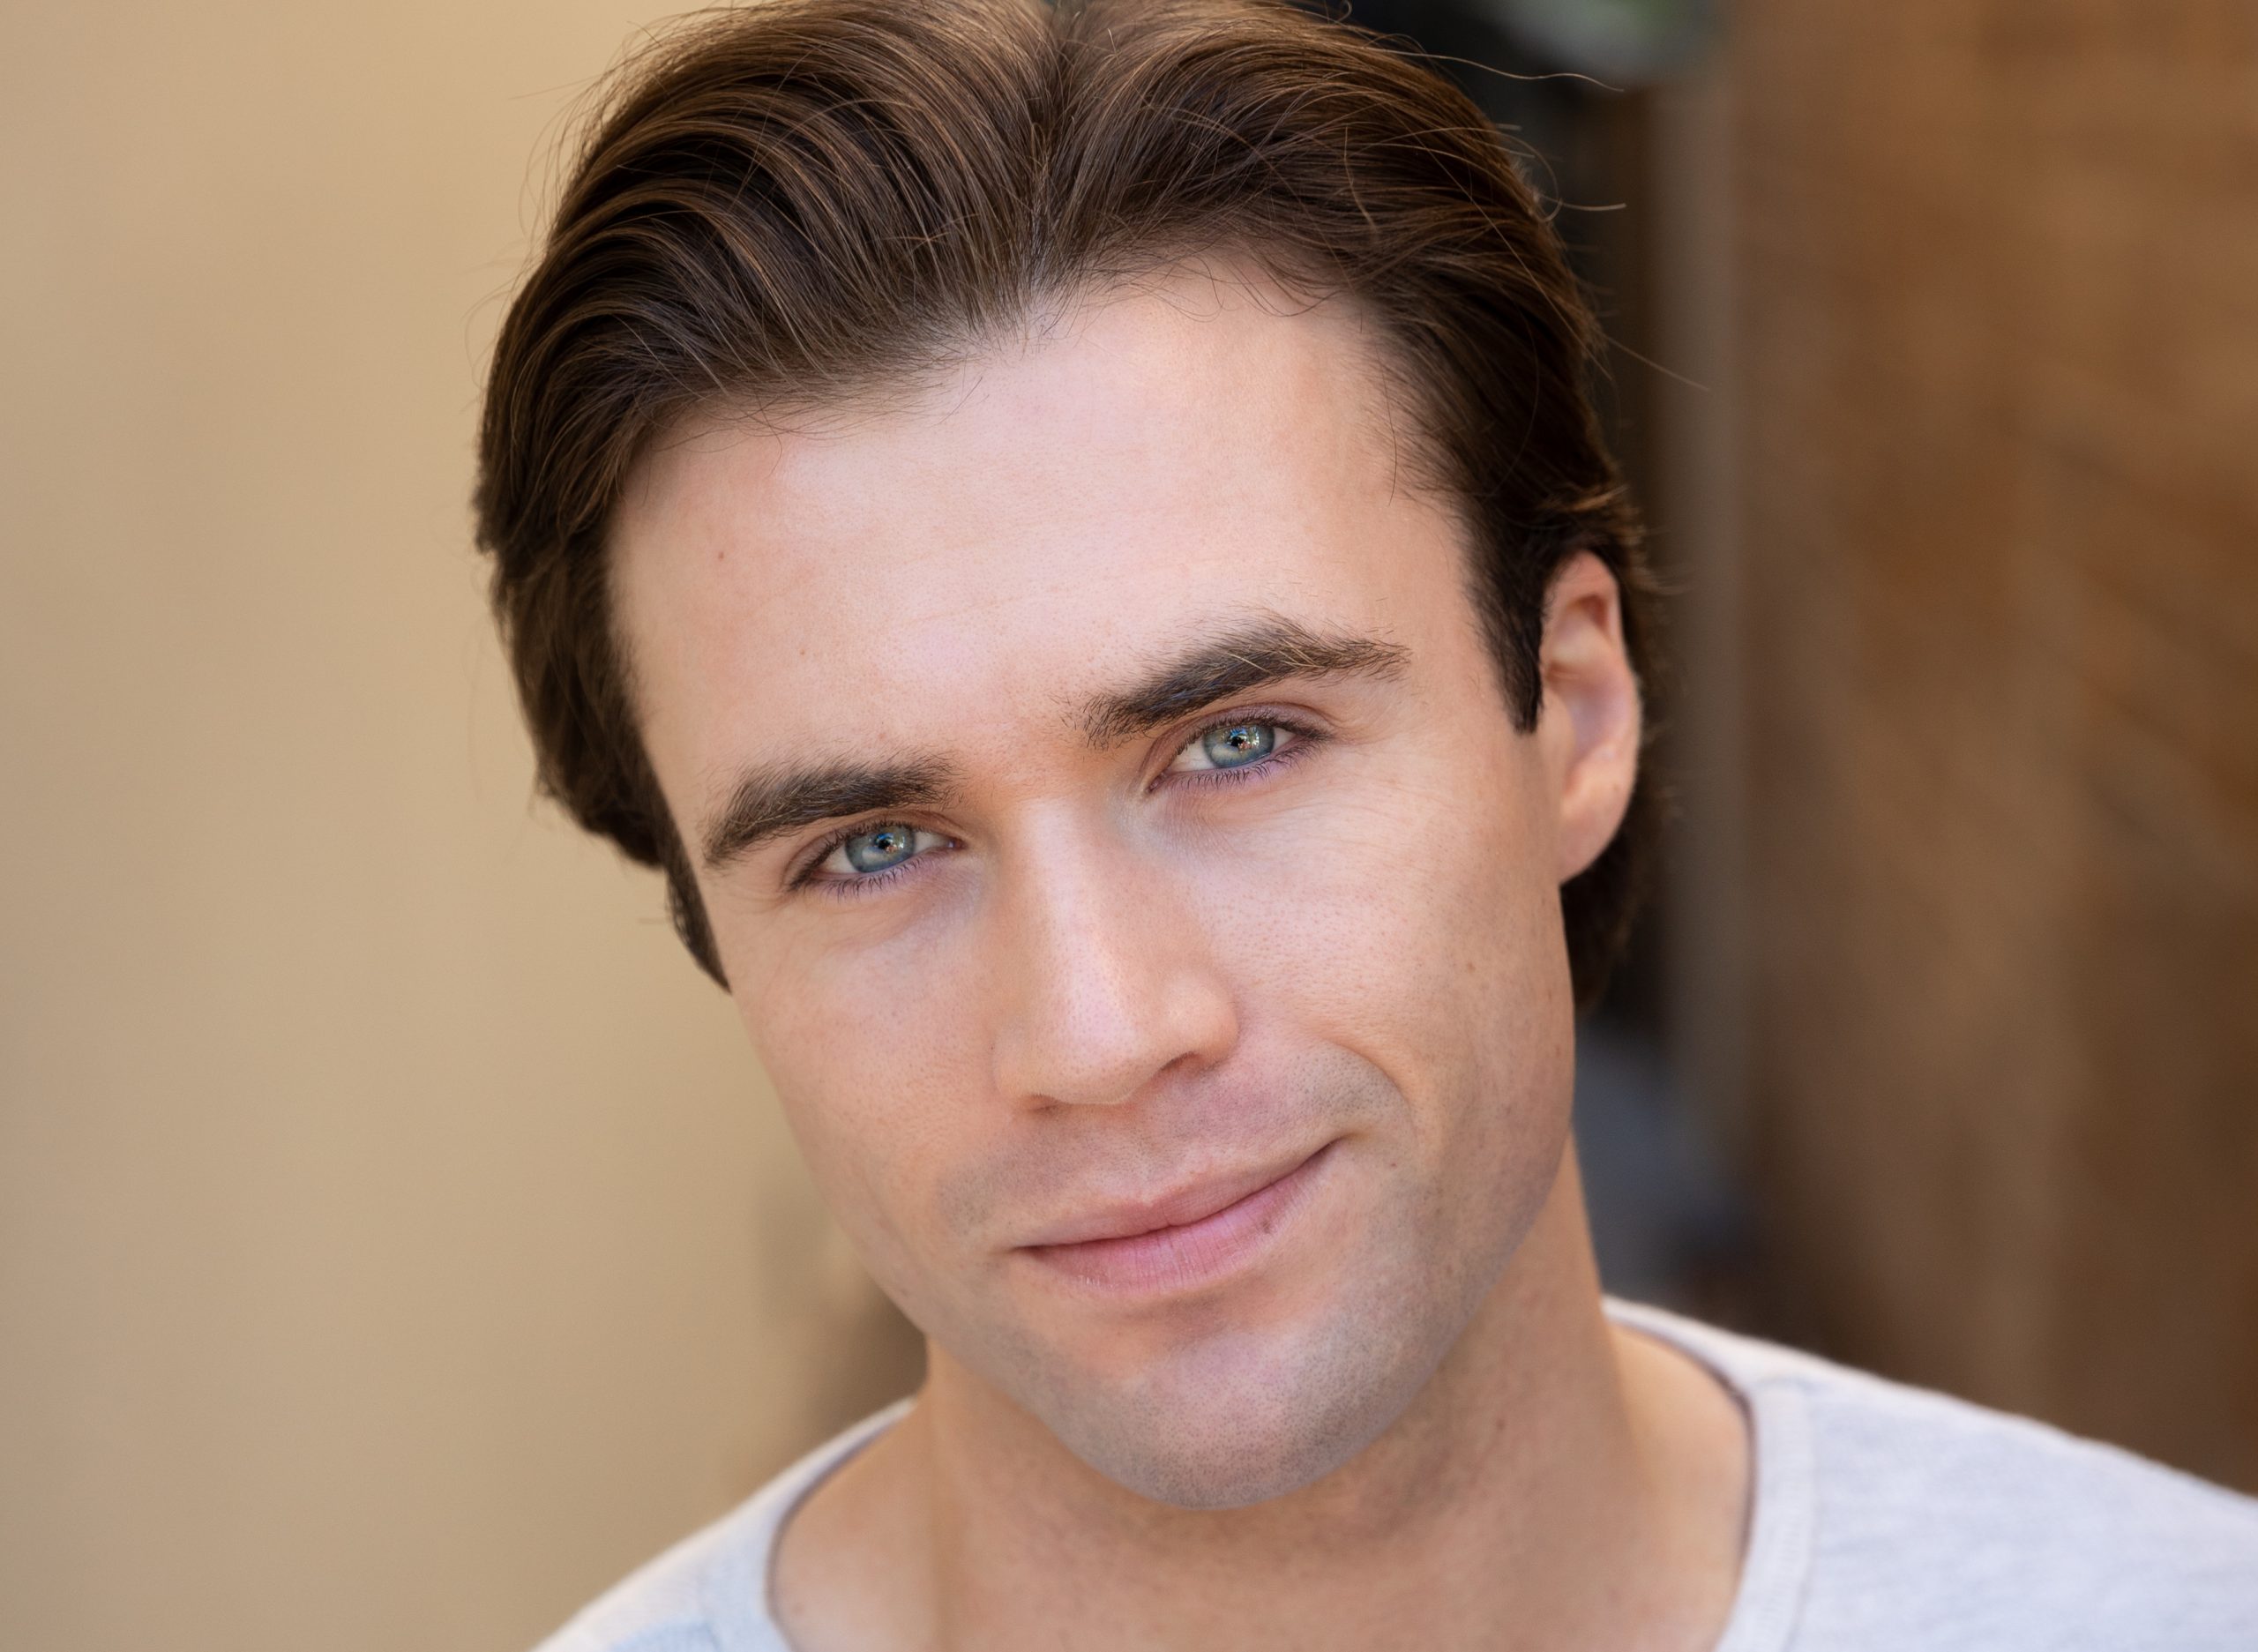 Thomas McGuane on being Prince Hans in FROZEN THE MUSICAL